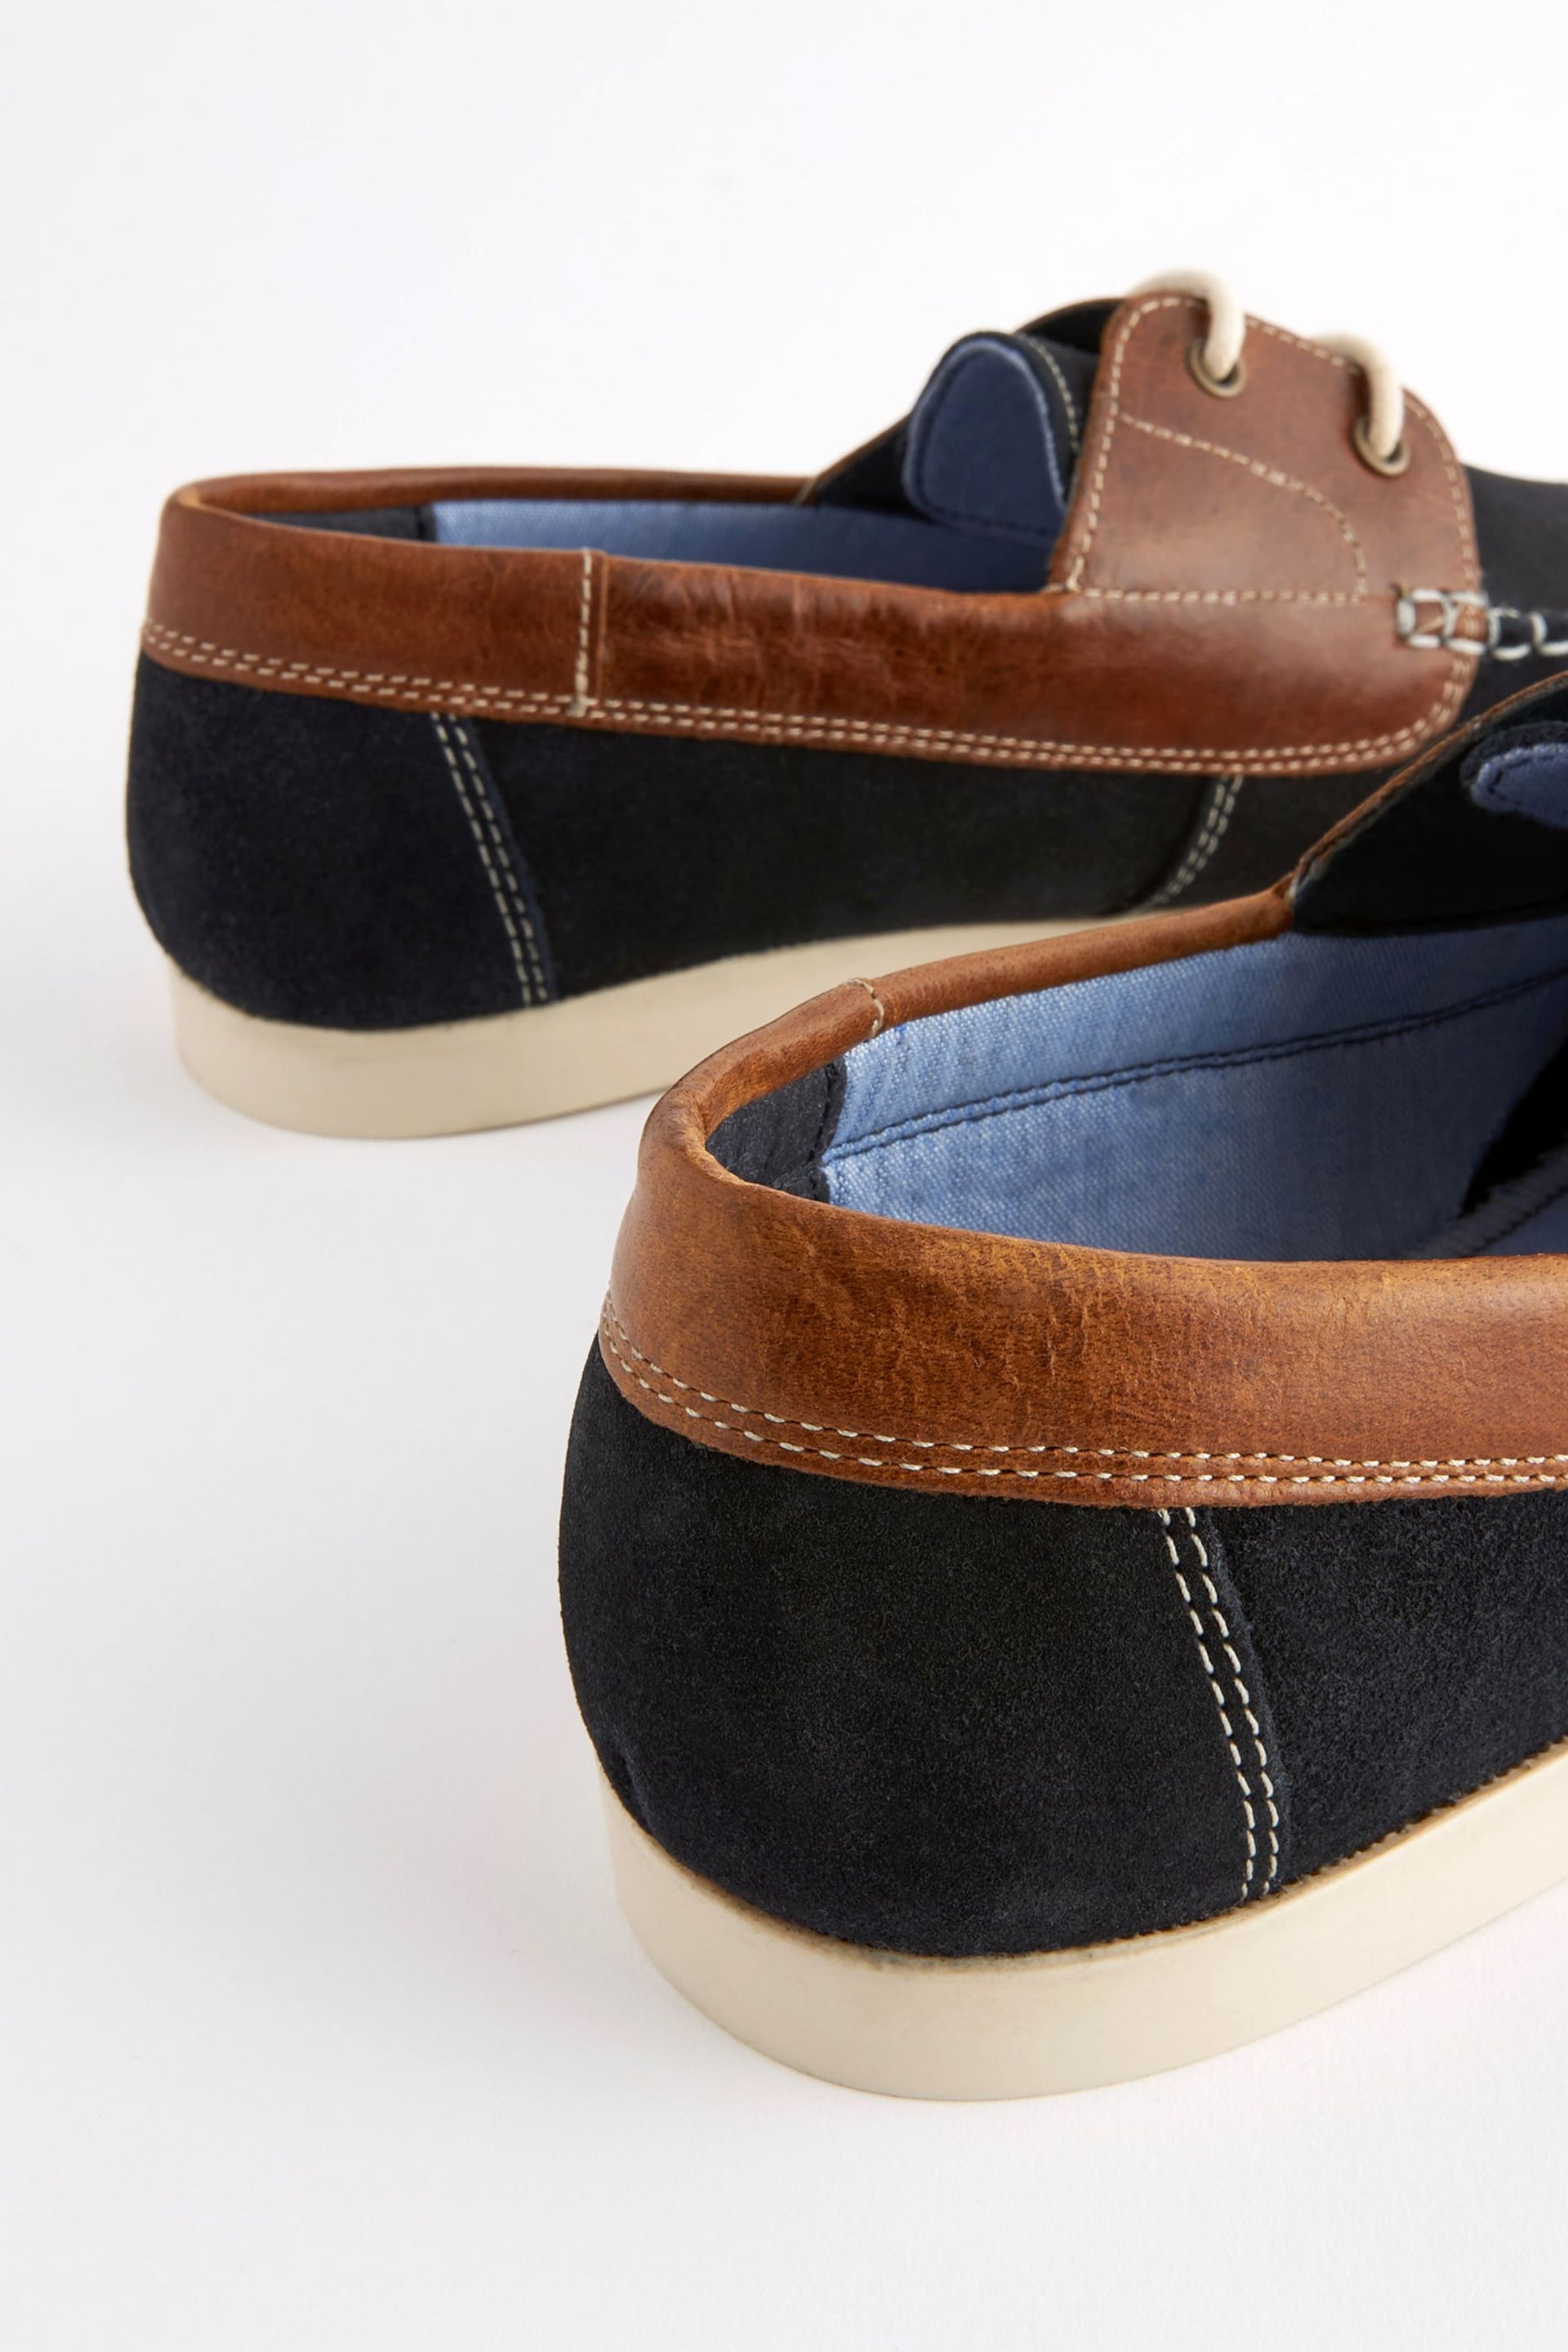 Tan Brown/Navy Blue Leather Boat Shoes - Image 6 of 6